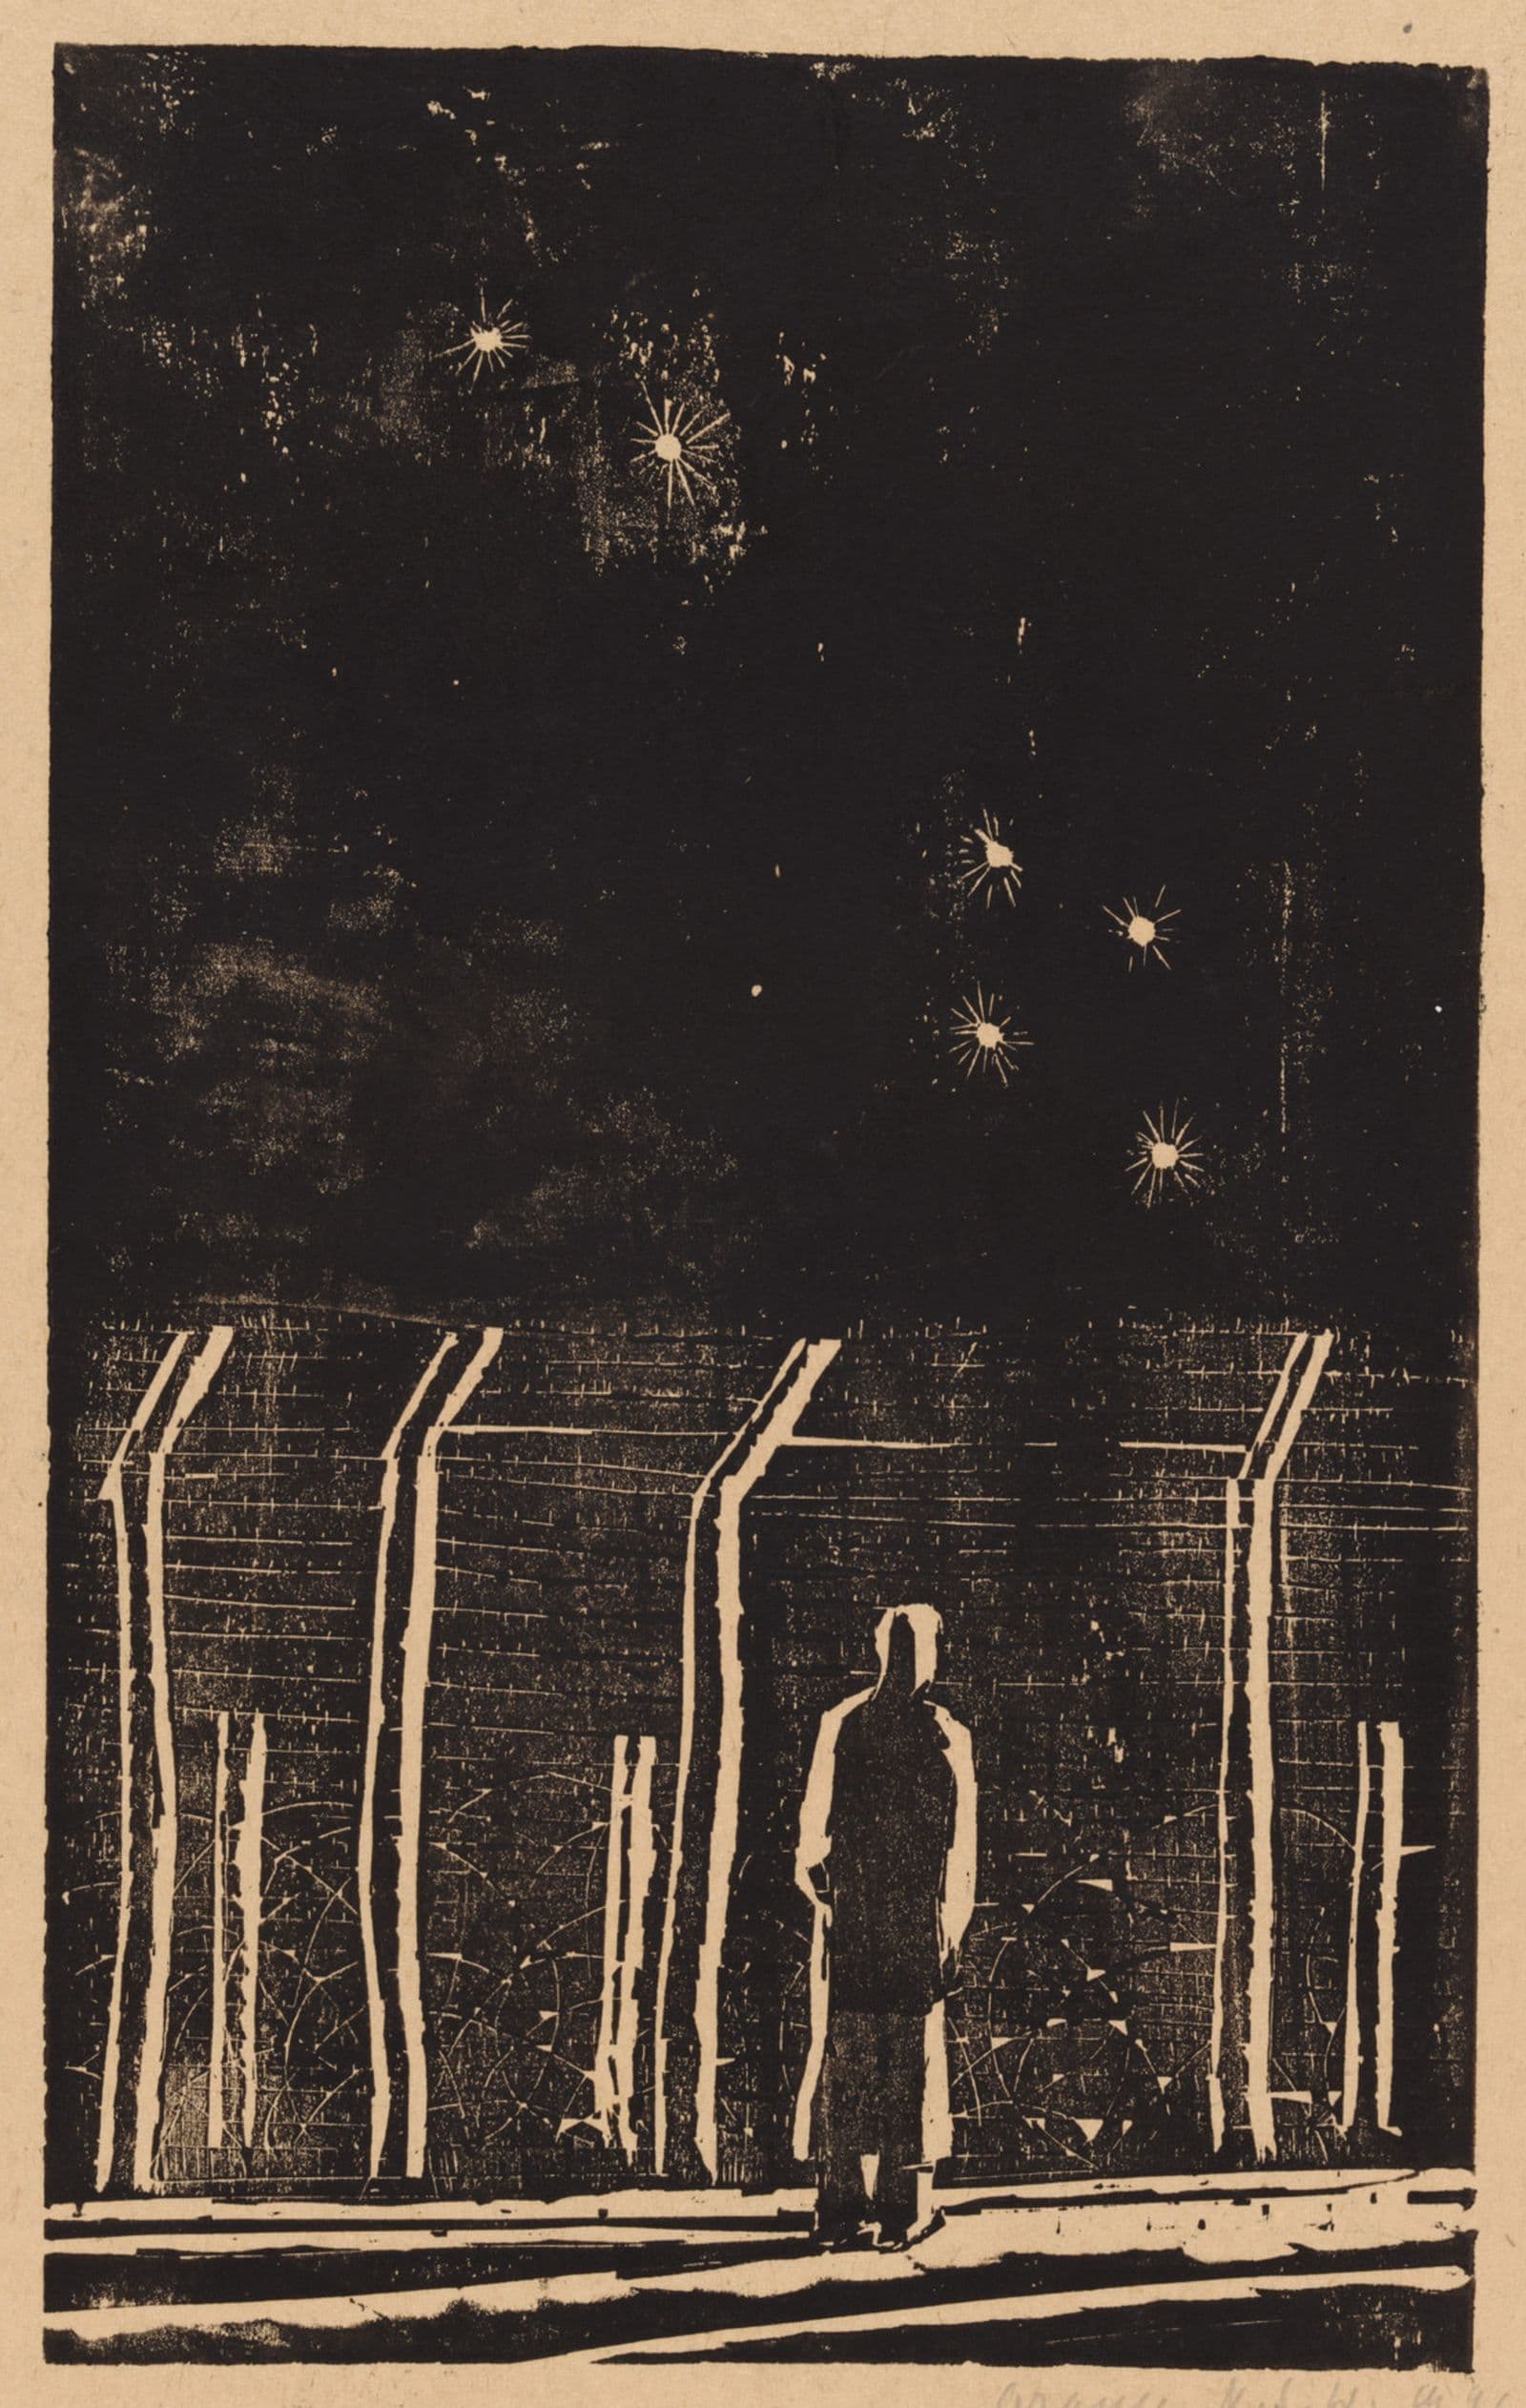 Black and white print of man in front of wire fence looking up at the southern cross